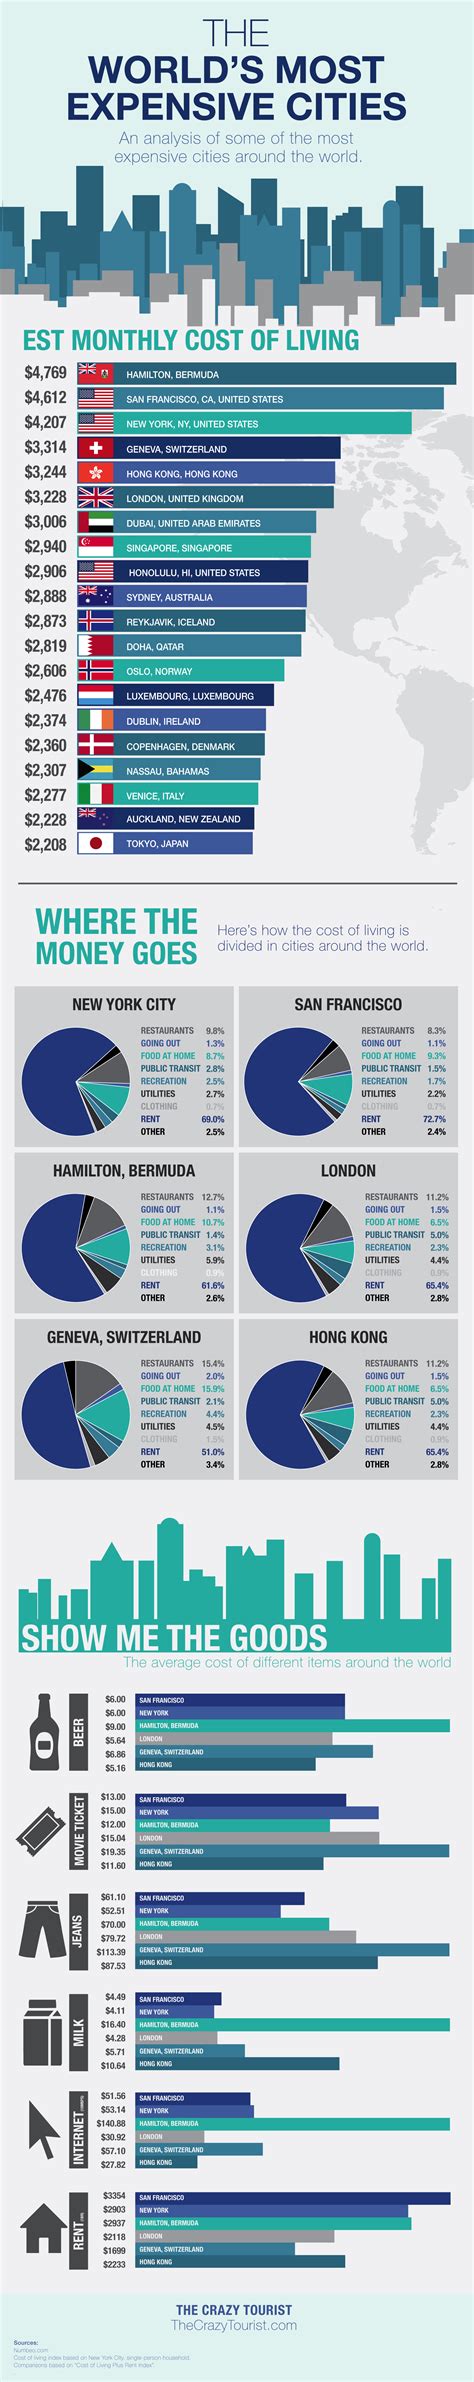 20 Of The Most Expensive Cities In The World Infographic